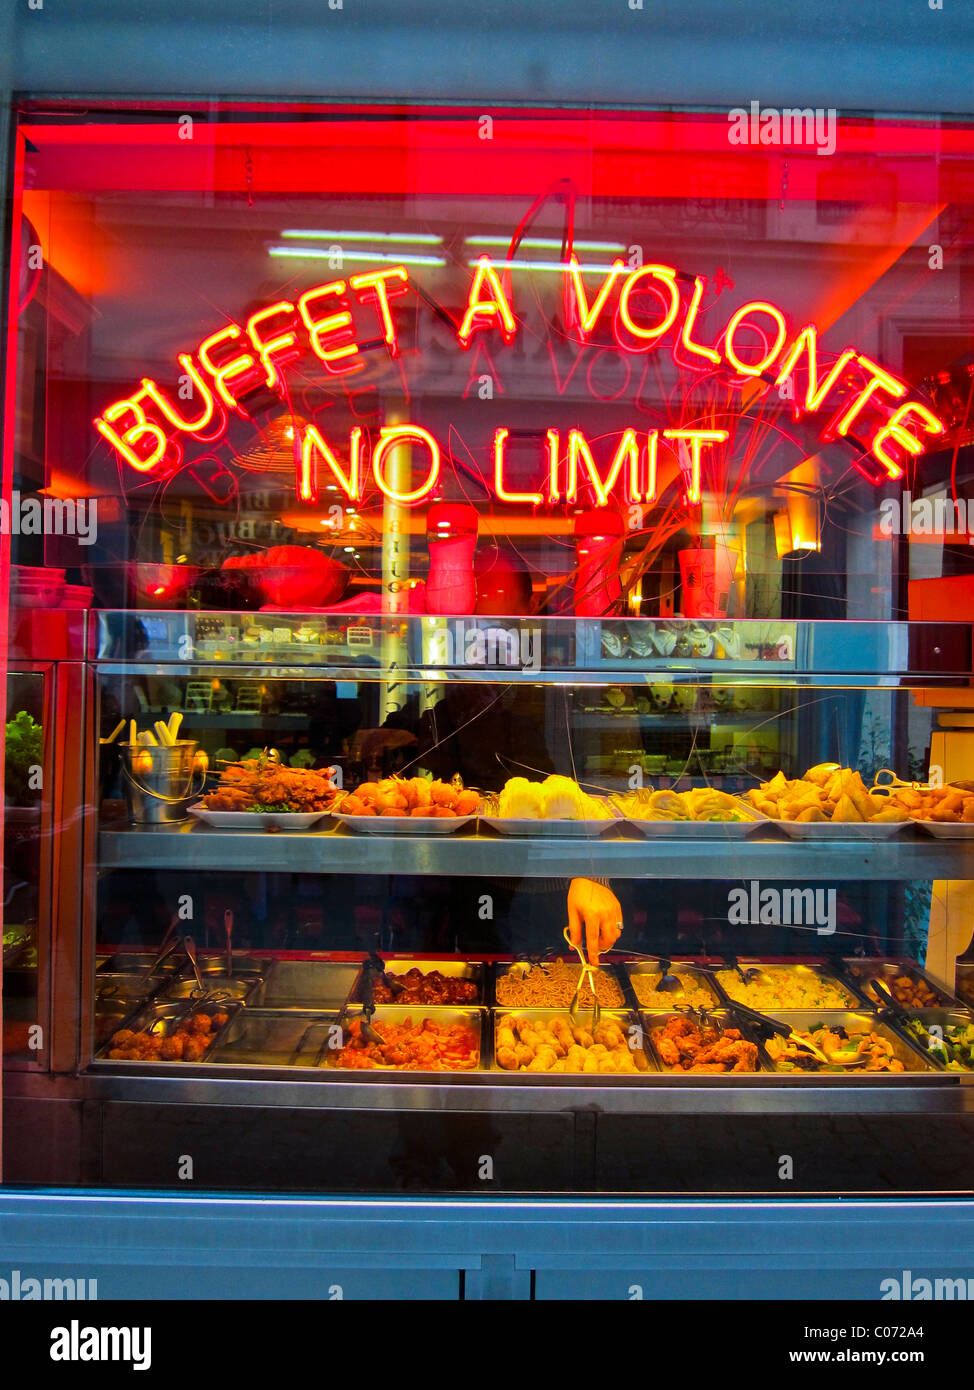 Paris, France, Chinese Restaurant Window, All-You-Can-Eat Buffet, Neon Sign  "No Limit" detail Stock Photo - Alamy